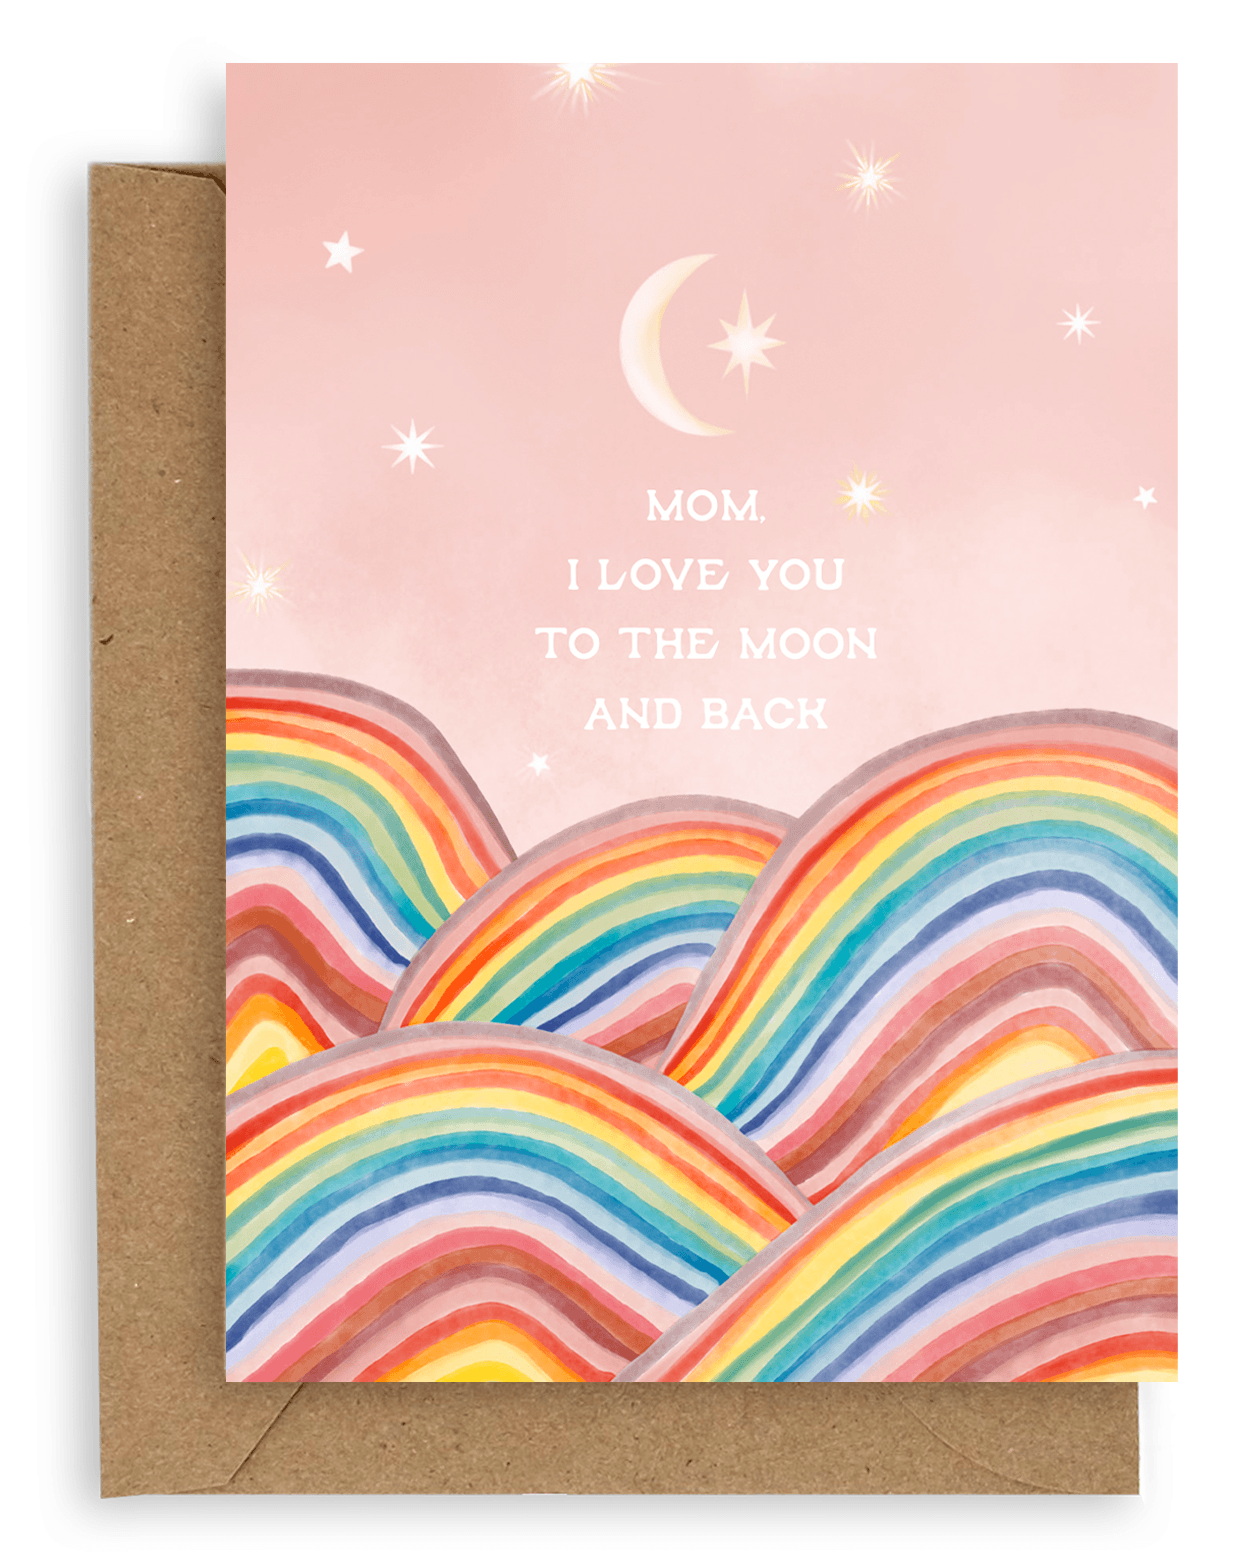 Adelfi card with the words "Mom, I love you to the moon and back" floating in a pink sky with a crescent moon and stars above rainbow hills. Card is shown on a kraft envelope.